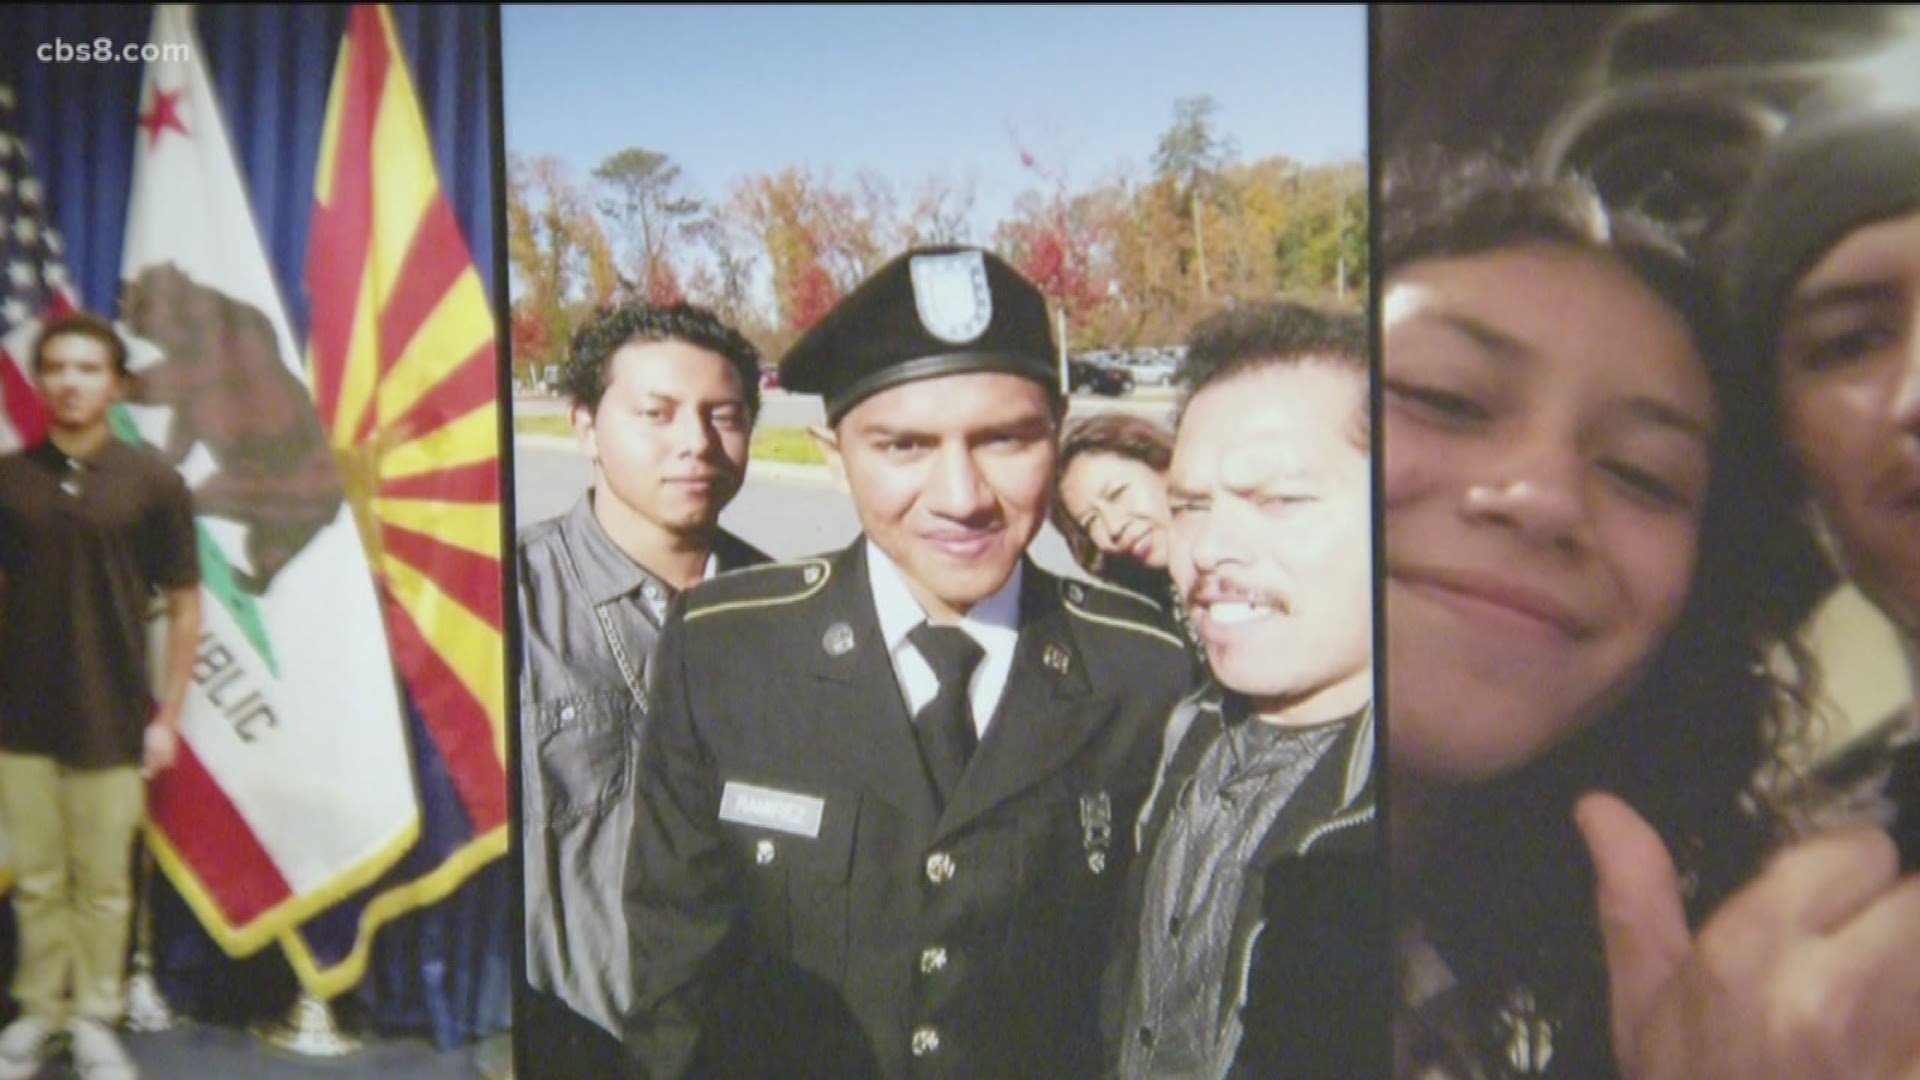 Loved ones of 23-year-old veteran from Chula Vista honored his service and his life Thursday night. He was killed in a wrong-way crash in Chula Vista.